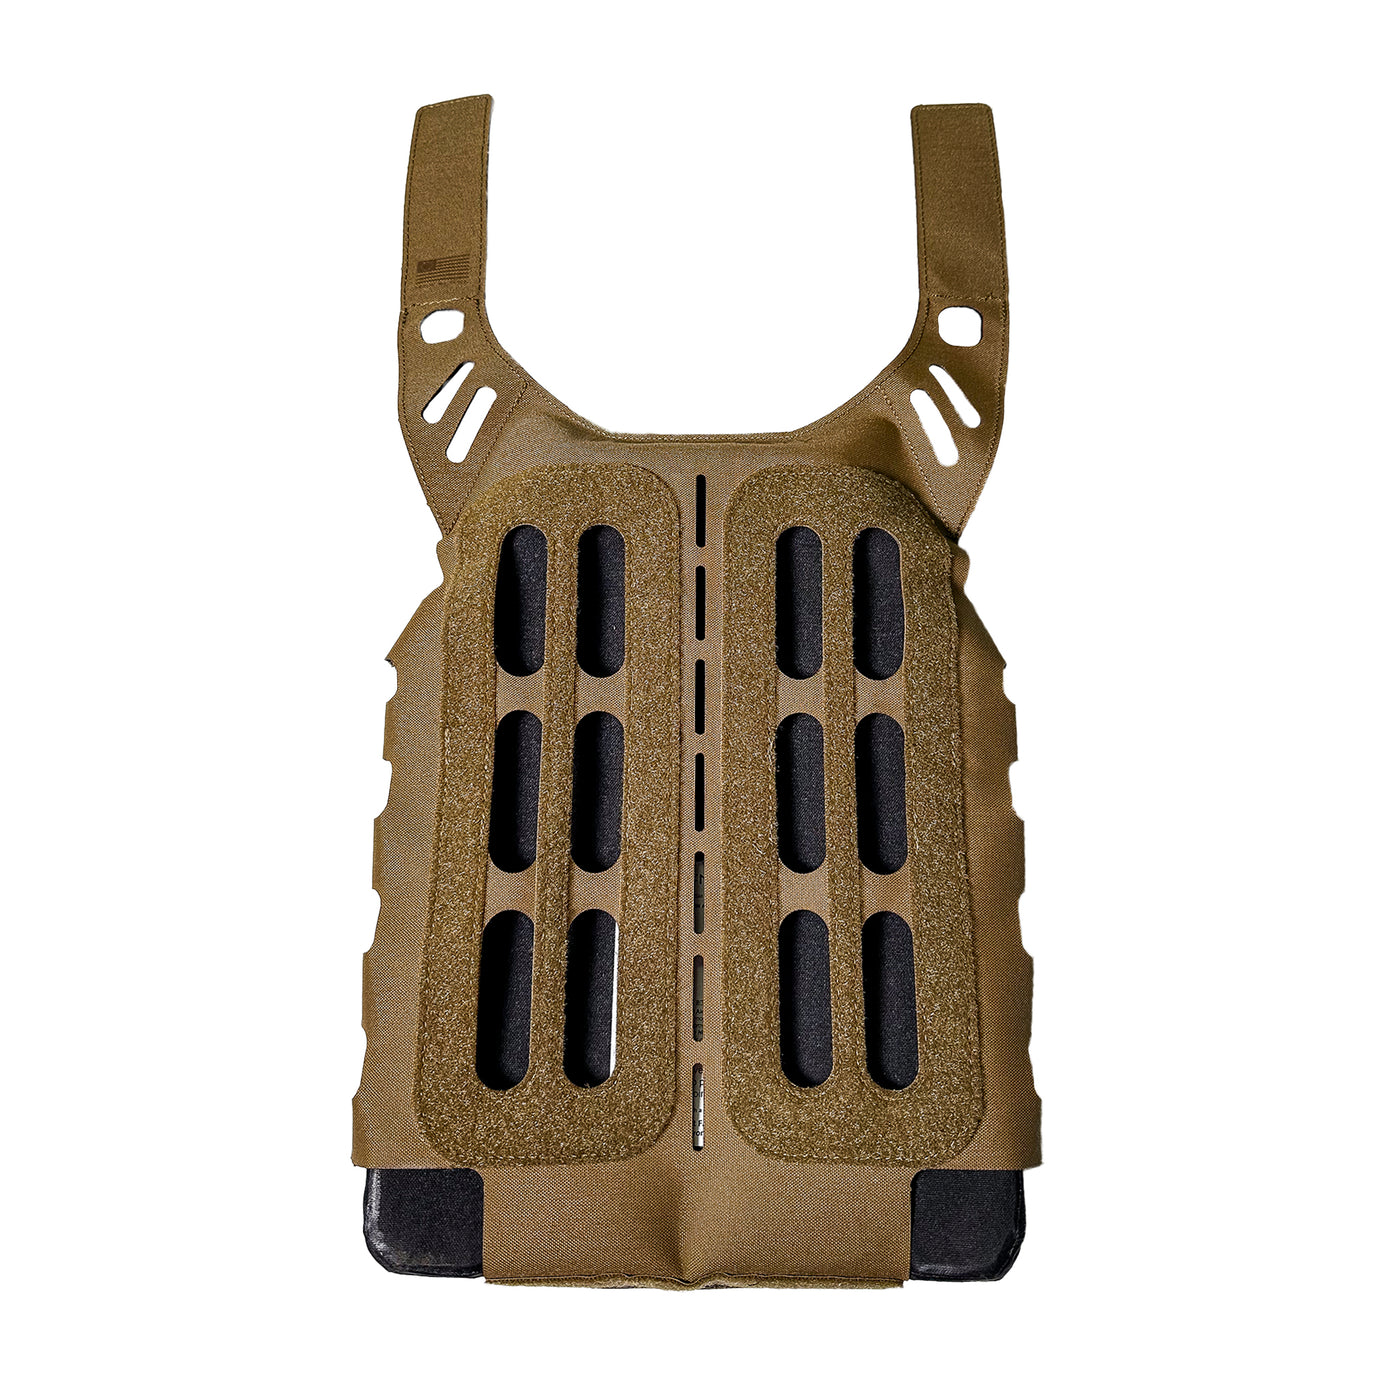 ICEPLATE EXO® Front Plate Bag Only - ICEPLATE EXO®-CRH to Plate Carrier Conversion Kit